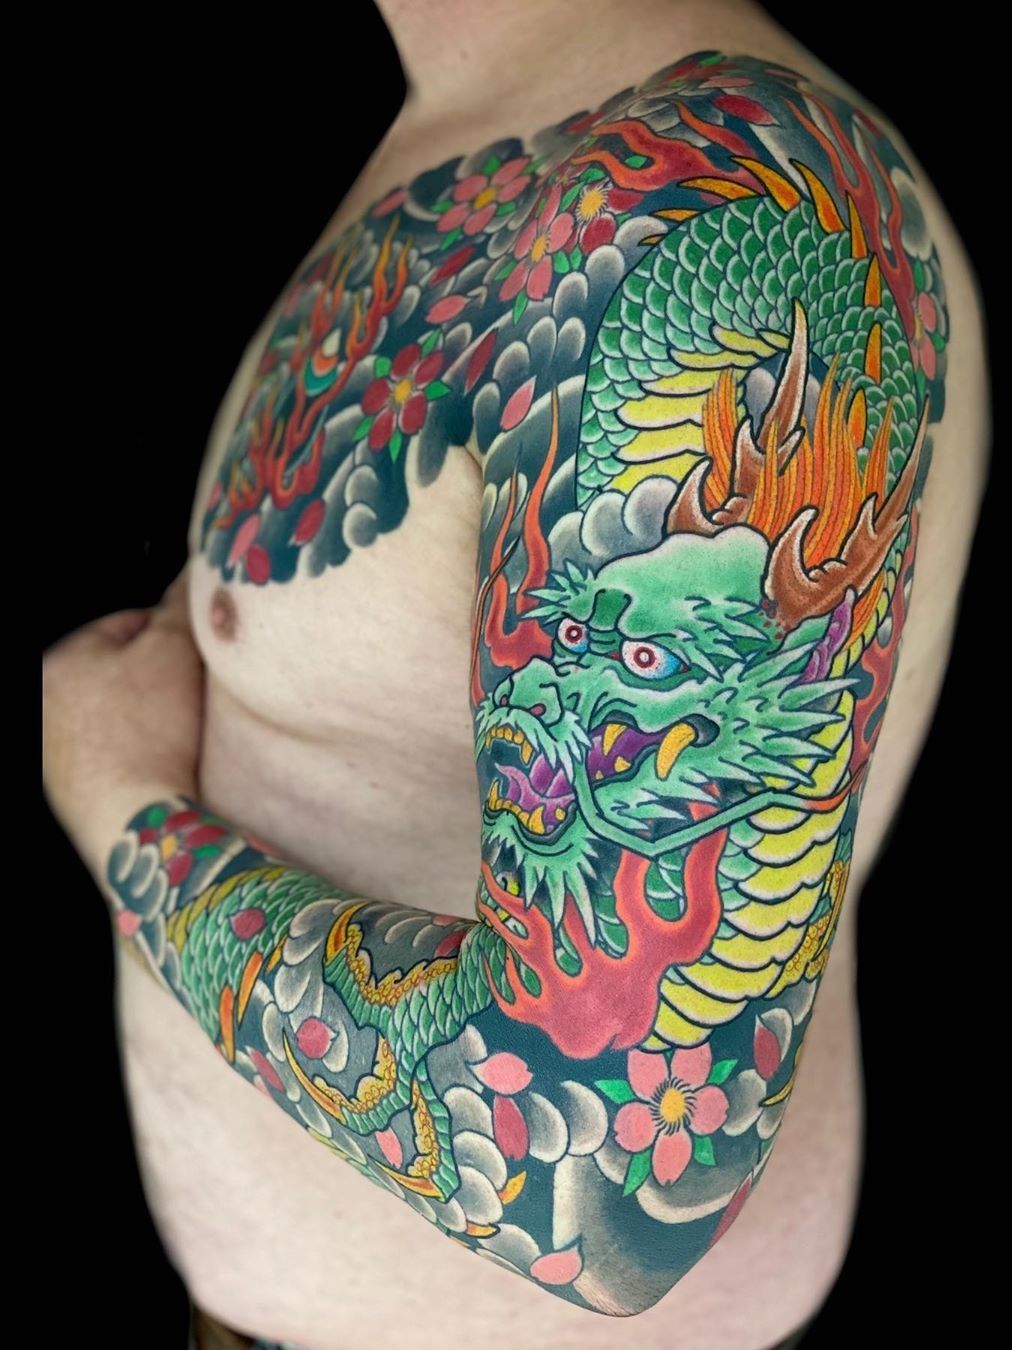 Happy Lunar New Year! 🐉 Wishing you all the joy and luck the Year of the  Dragon brings! I love this dragon tattoo I did a few years ag... | Instagram